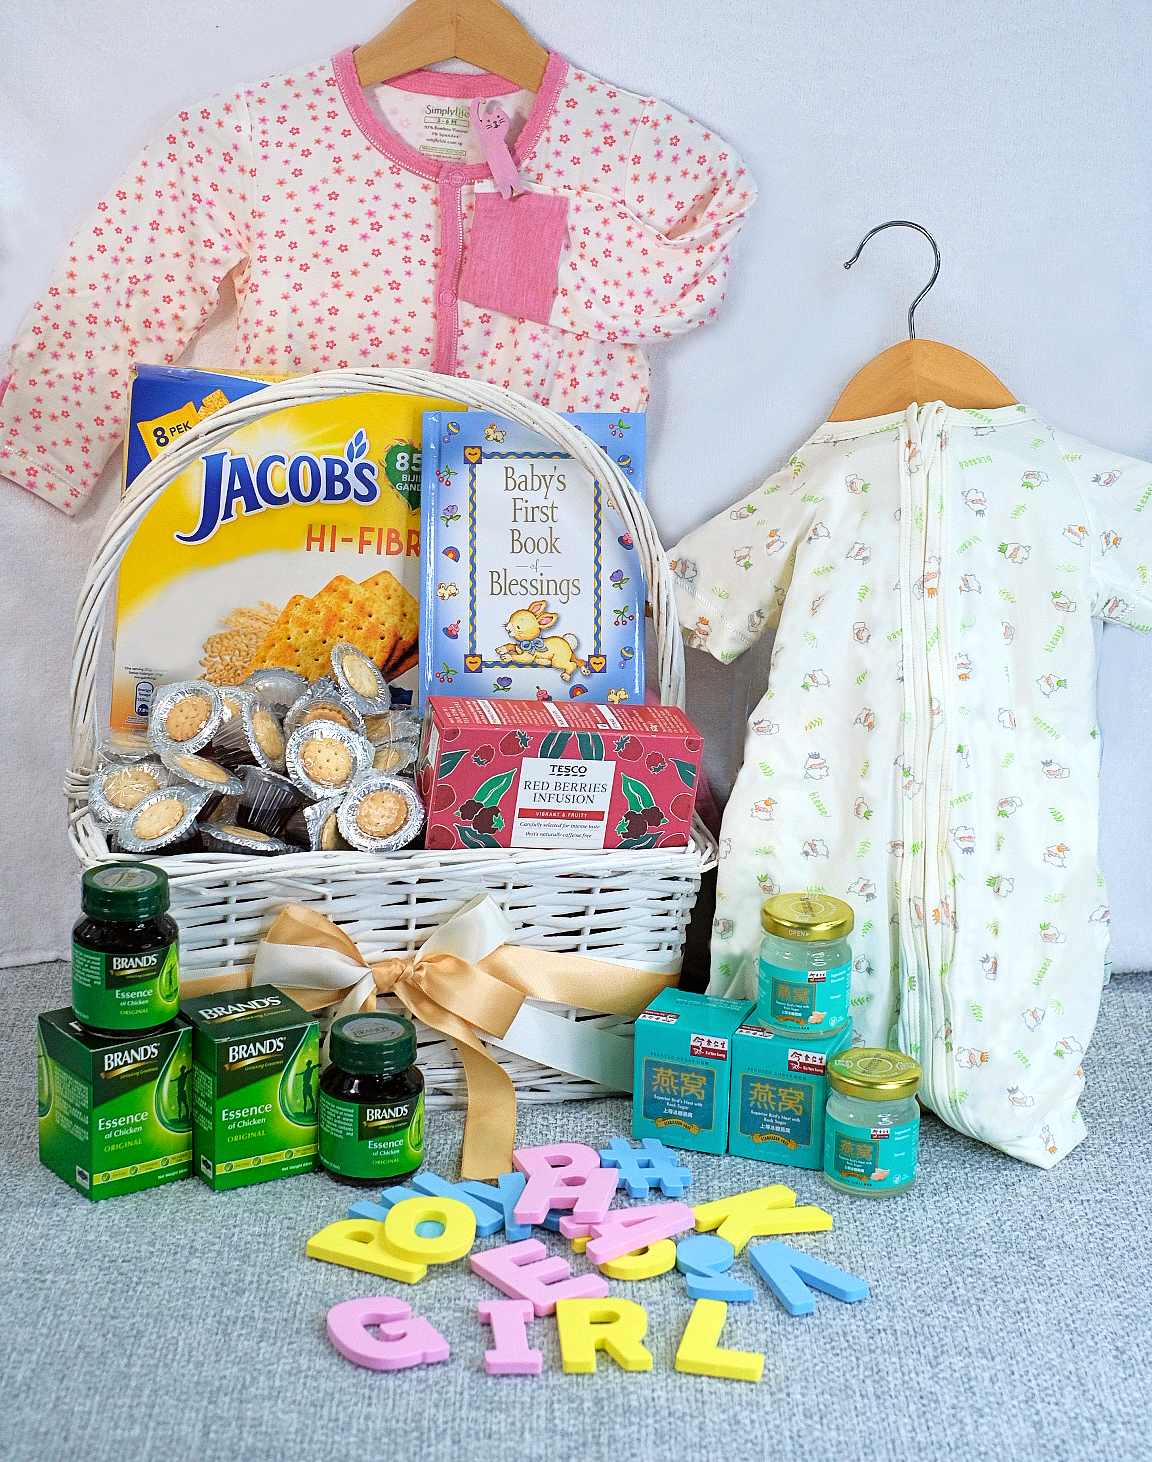 ROCKONLINE | New Creation Church | Graceful Baby Hamper | NCC | Joseph Prince | ROCK Bookshop | ROCK Bookstore | Star Vista | Christian Living | Baby Girl | Holy Communion Elements | Newborn | Brands Essence of Chicken | Gift Ideas | New Mom | New Parents | Free delivery for Singapore Orders above $50